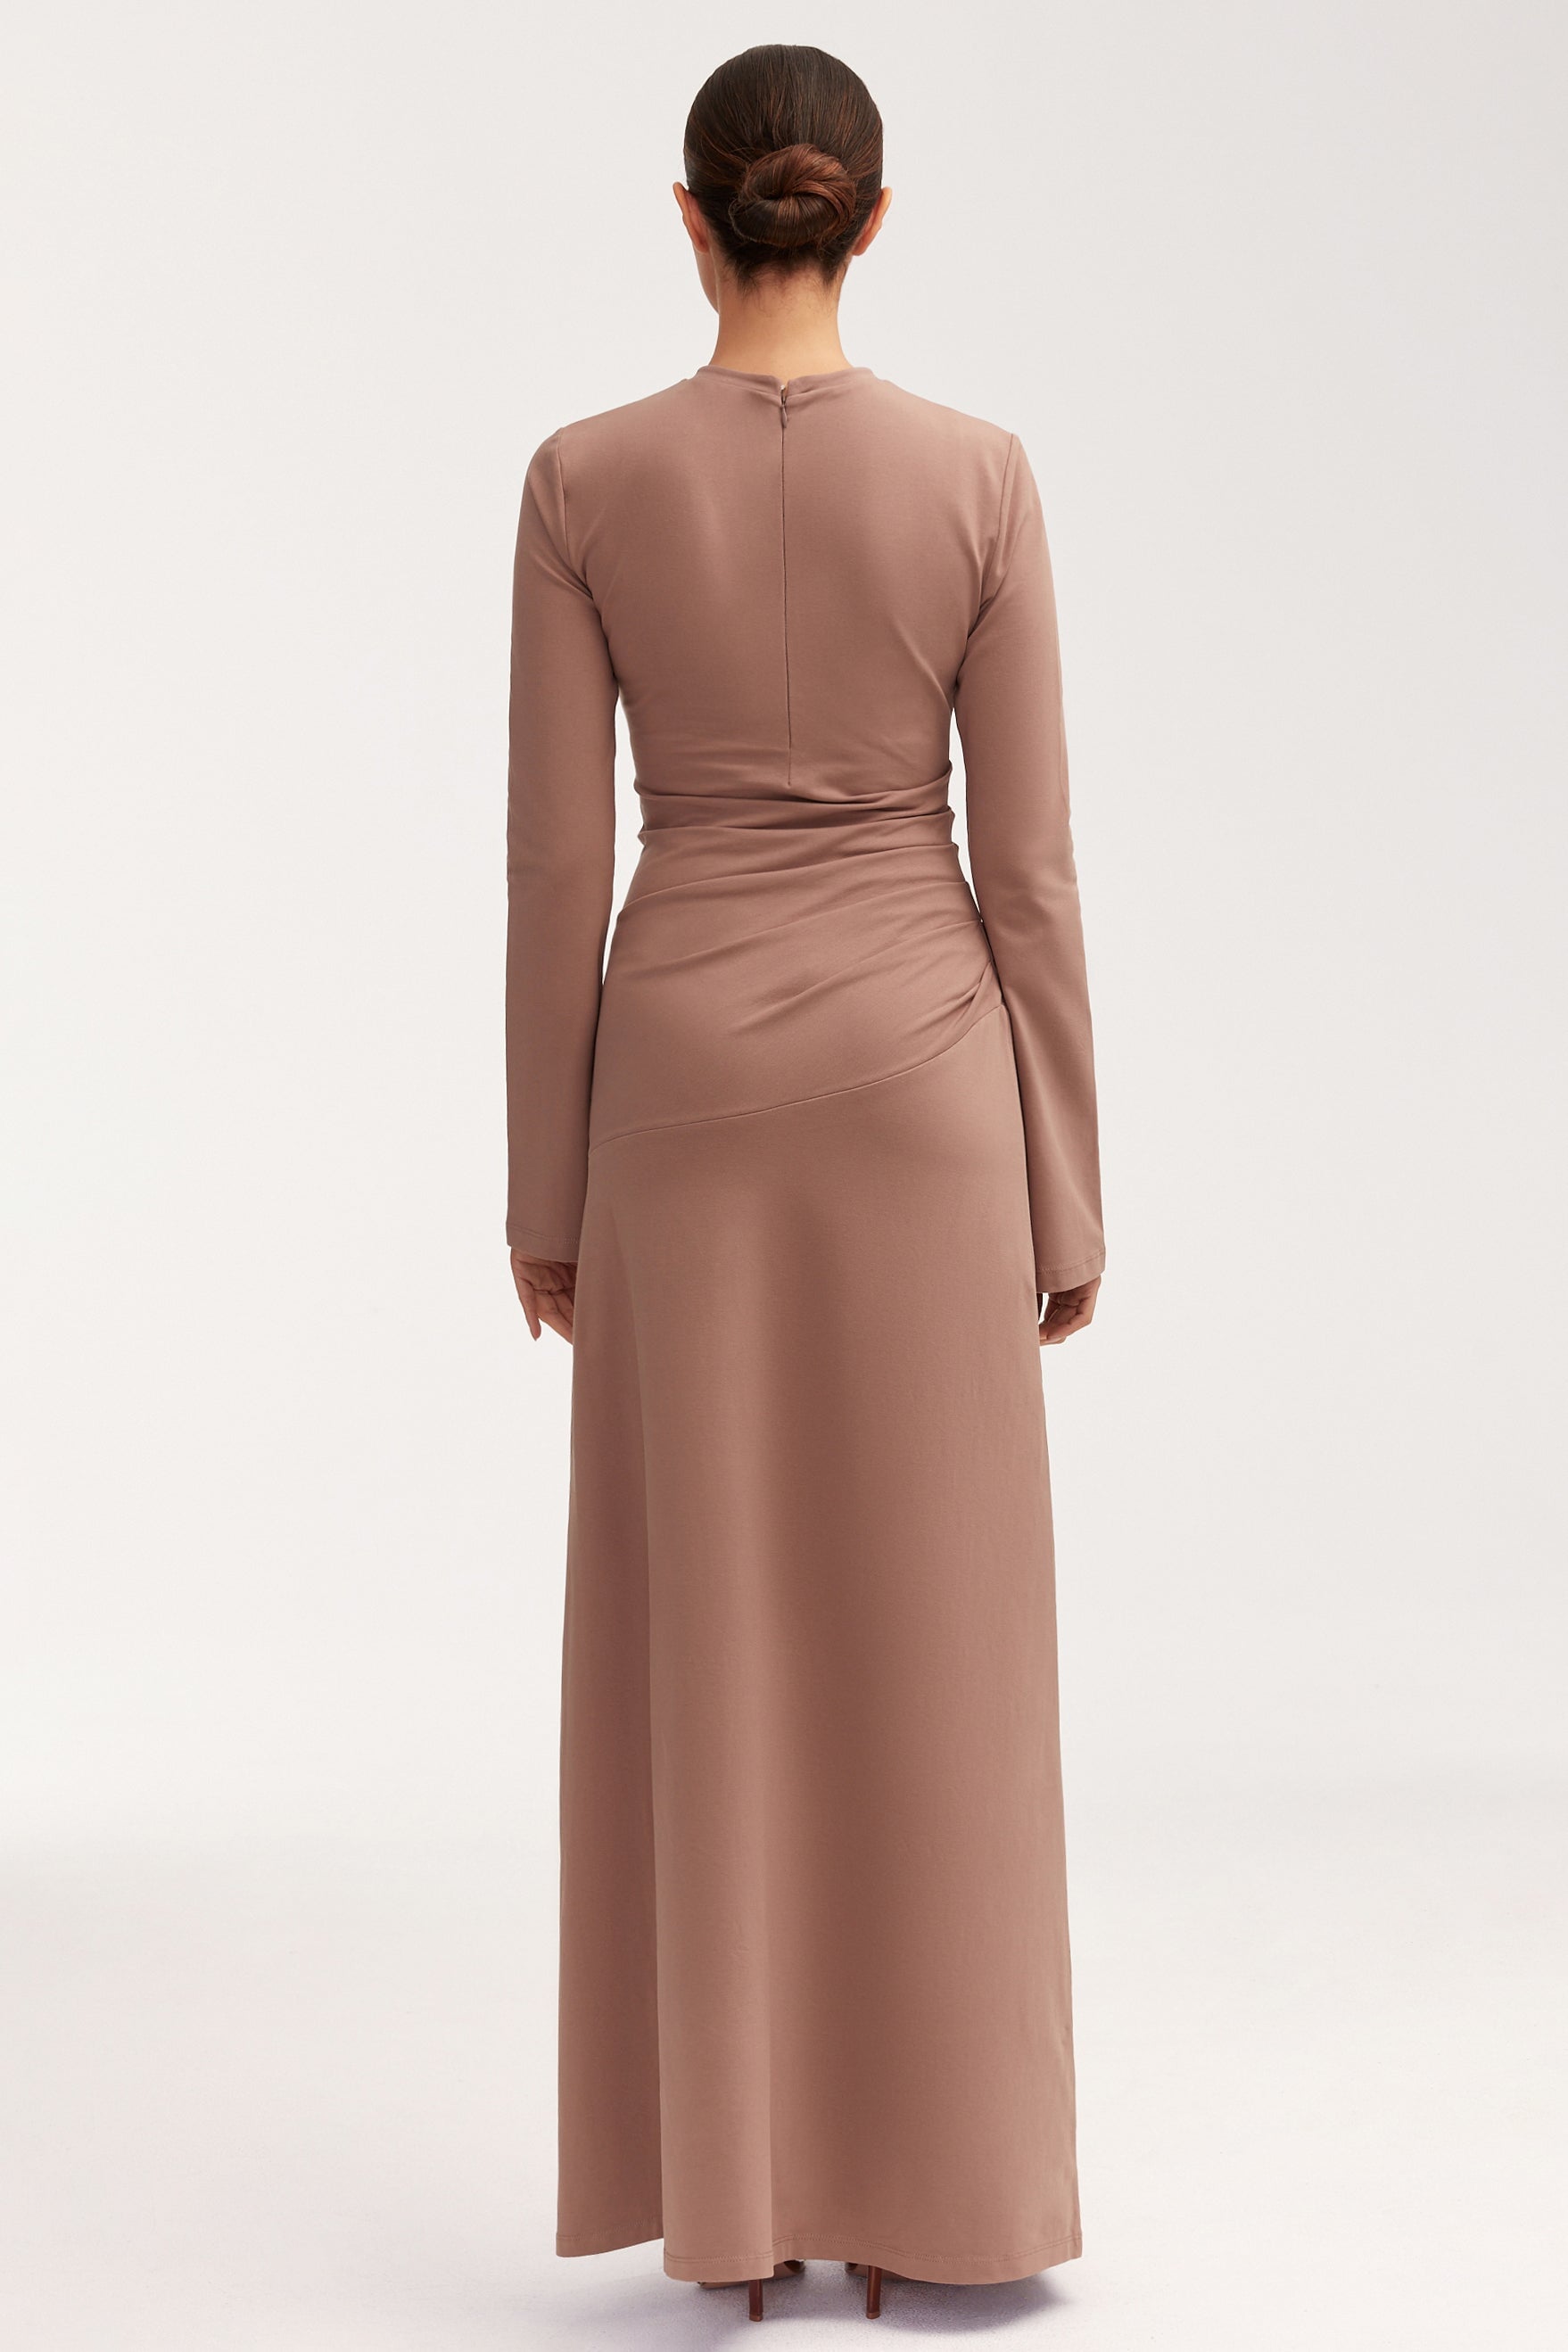 Natalie Rouched Jersey Maxi Dress - Deep Taupe Dresses Veiled 